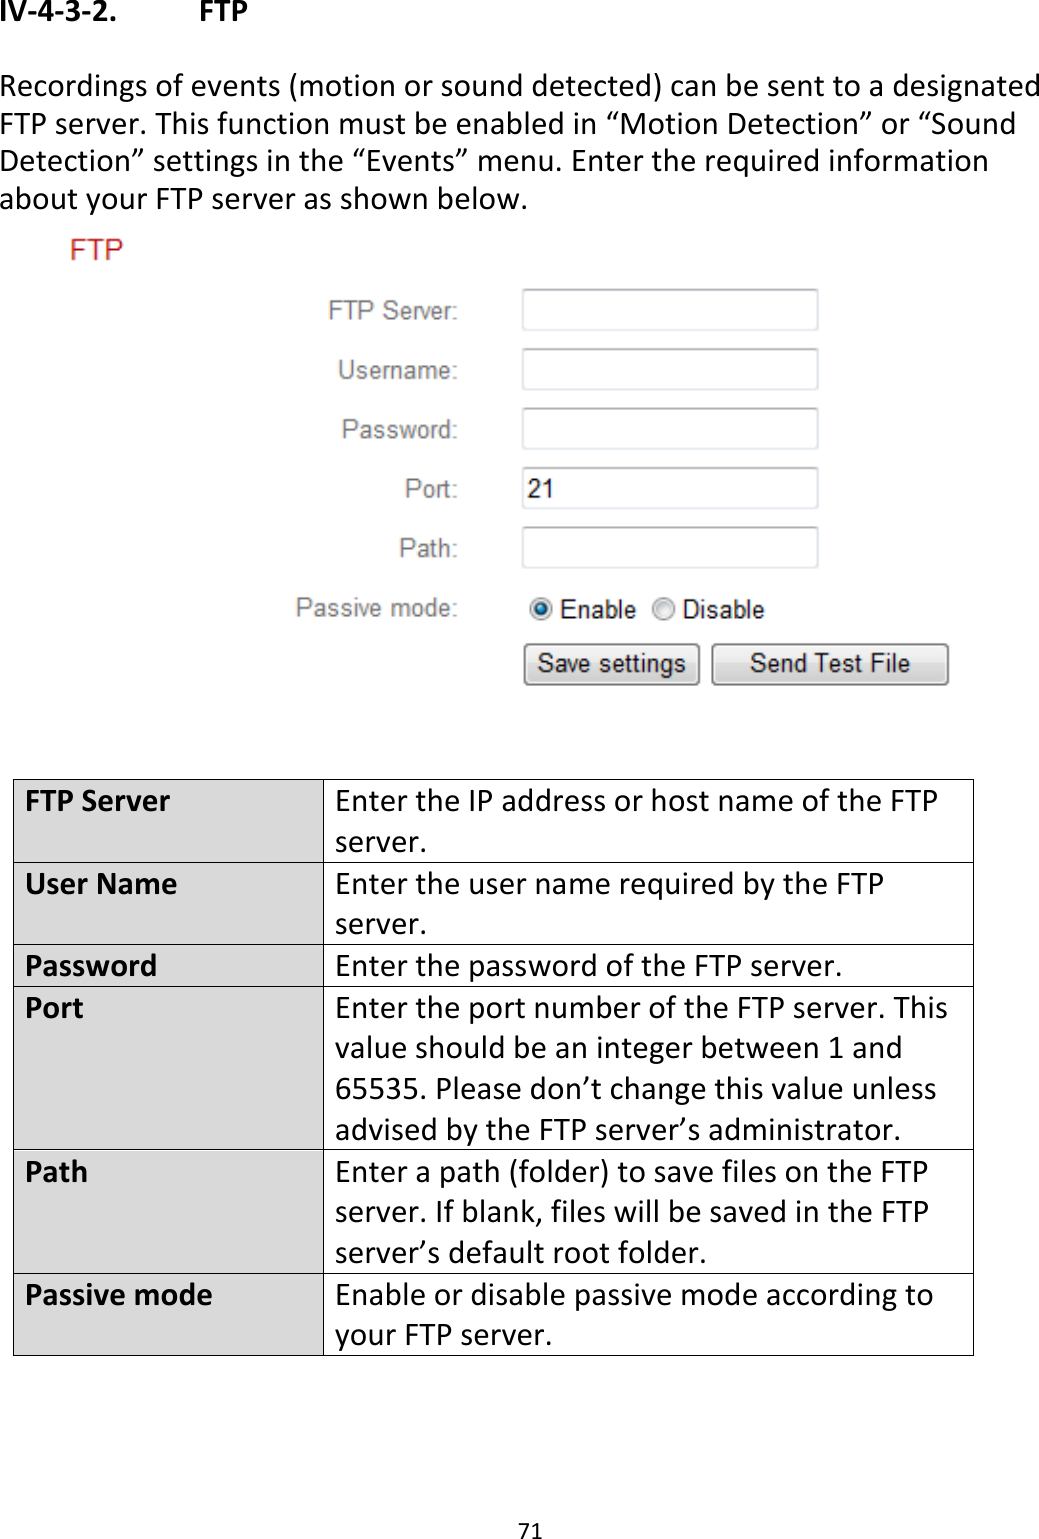 71  IV-4-3-2.    FTP  Recordings of events (motion or sound detected) can be sent to a designated FTP server. This function must be enabled in “Motion Detection” or “Sound Detection” settings in the “Events” menu. Enter the required information about your FTP server as shown below.   FTP Server Enter the IP address or host name of the FTP server. User Name Enter the user name required by the FTP server. Password Enter the password of the FTP server. Port Enter the port number of the FTP server. This value should be an integer between 1 and 65535. Please don’t change this value unless advised by the FTP server’s administrator. Path Enter a path (folder) to save files on the FTP server. If blank, files will be saved in the FTP server’s default root folder. Passive mode Enable or disable passive mode according to your FTP server.   